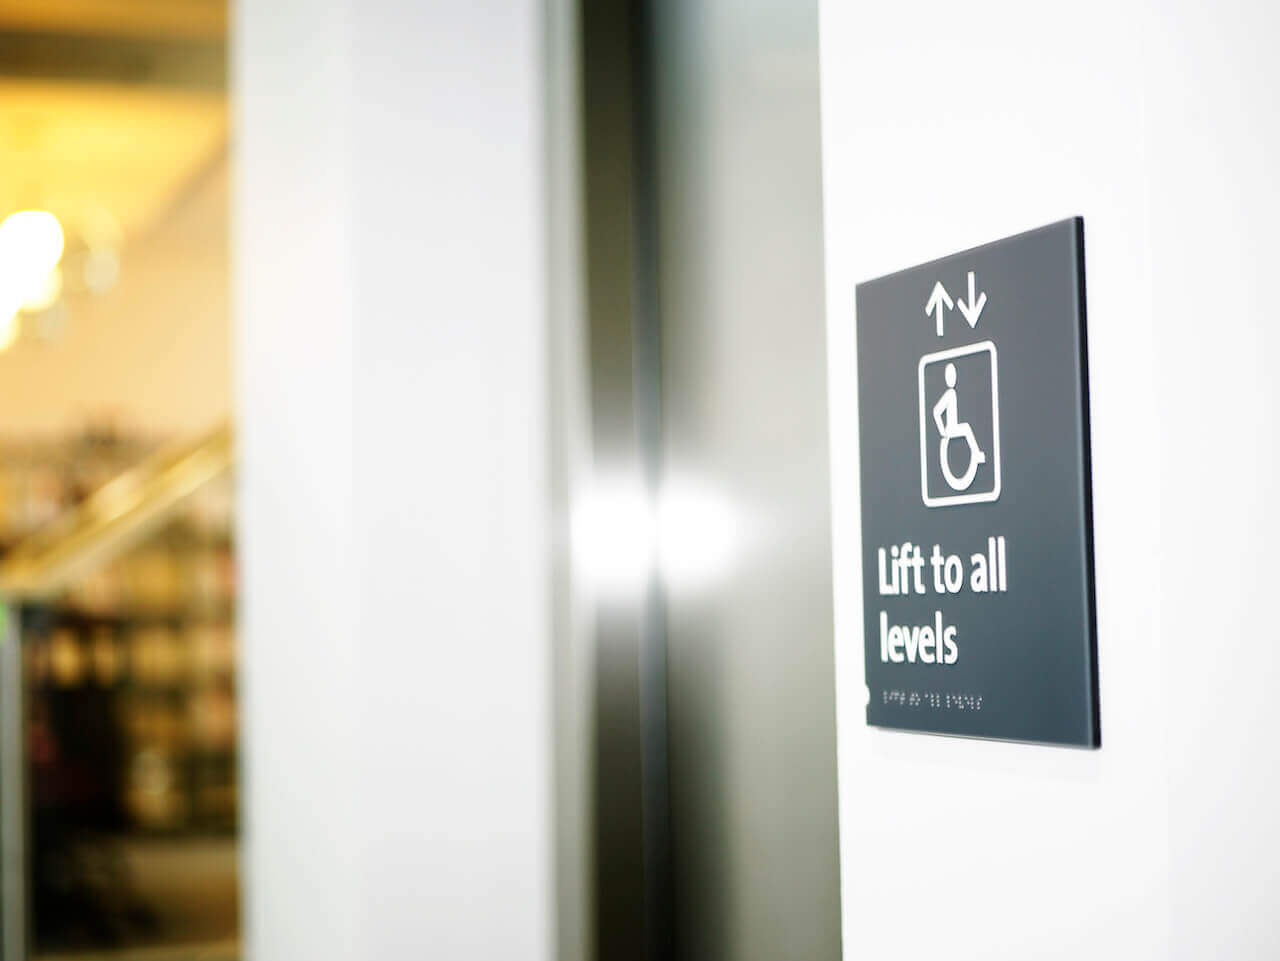 Accessible touch legible signage with Braille and pictograms